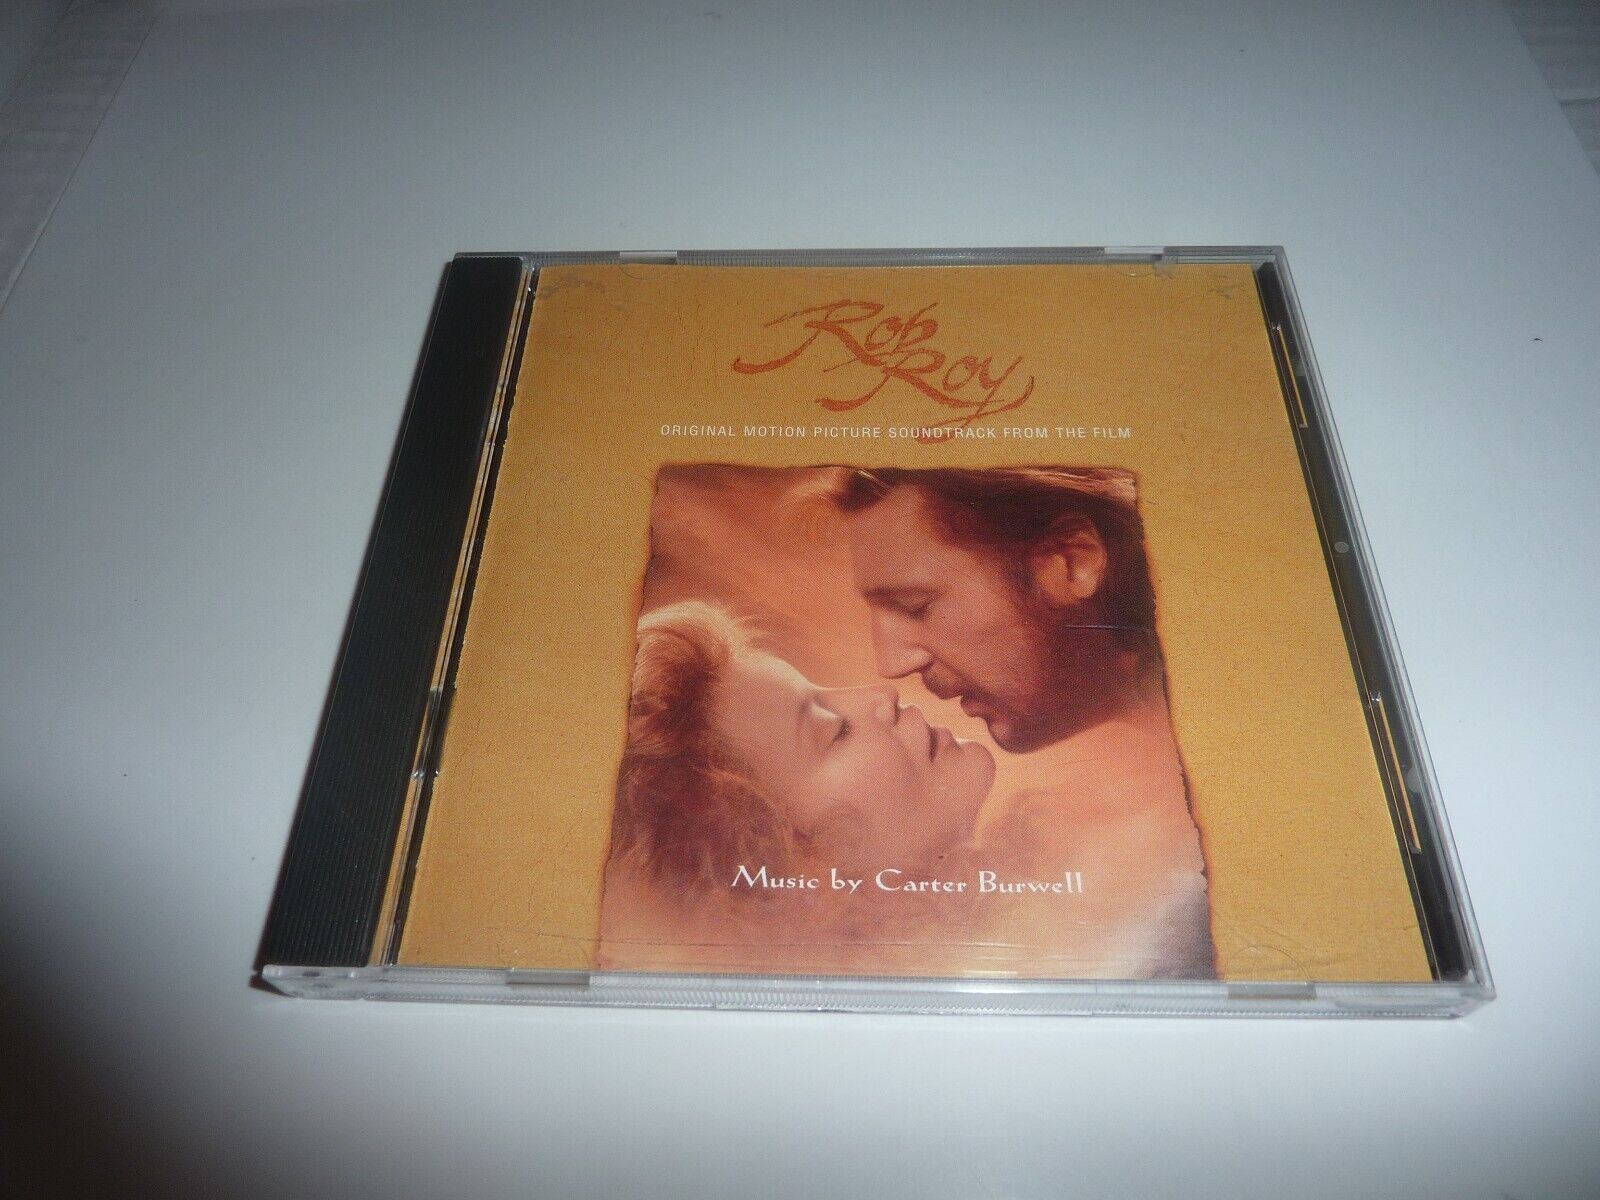 ROB ROY Motion Picture Soundtrack CD Carter Burwell VG/EX